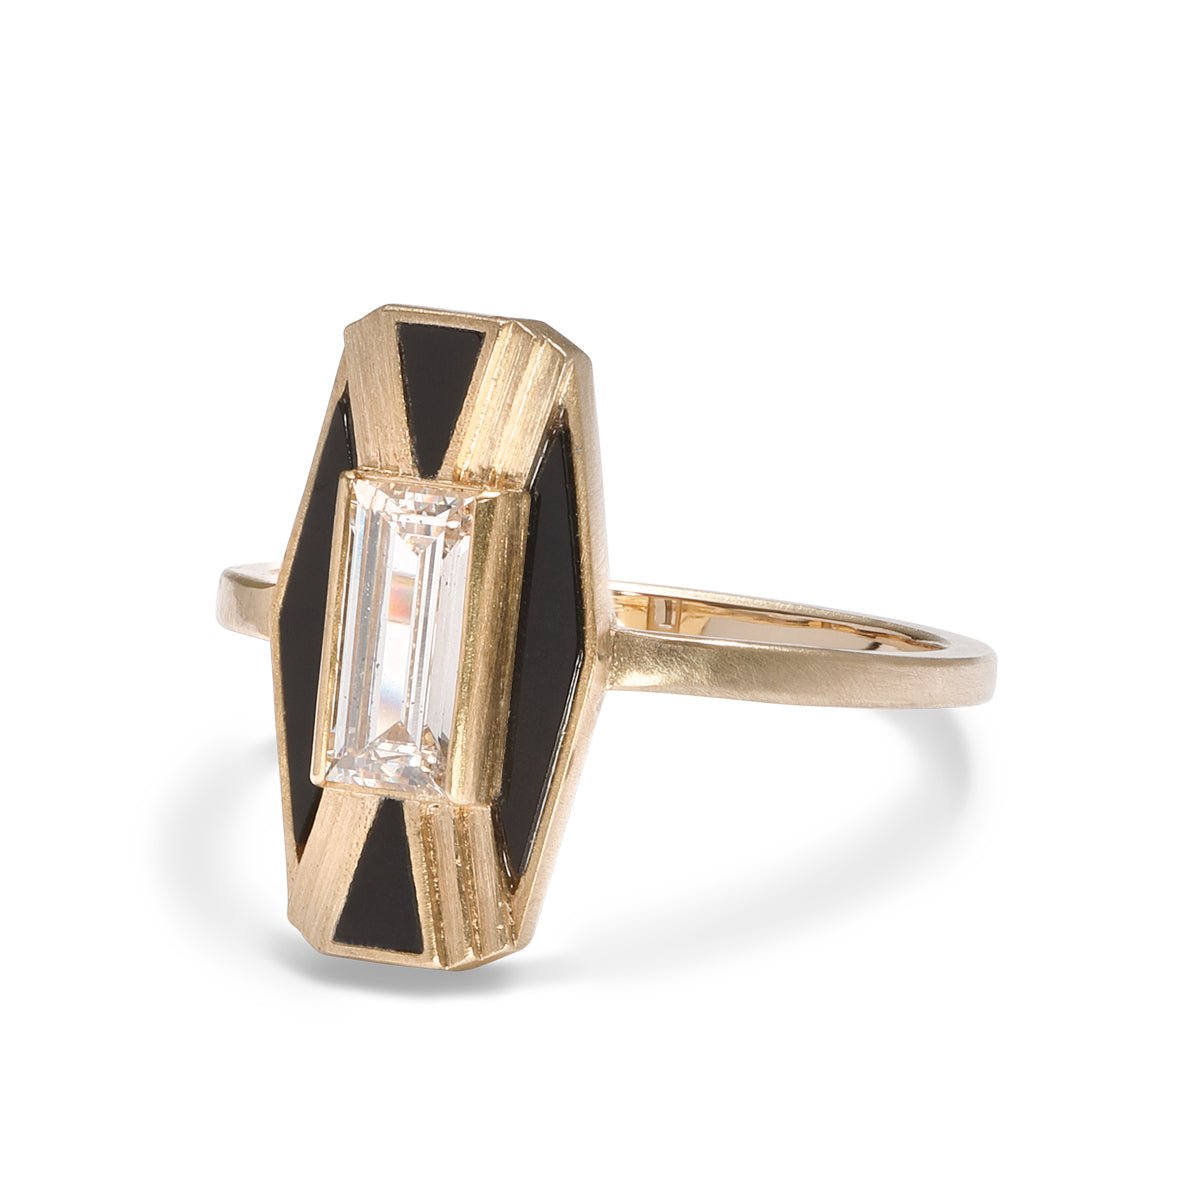 Imber cocktail ring with lab-grown baguette diamond focal and Oregon black jasper inlay. Set in 14K recycled gold.